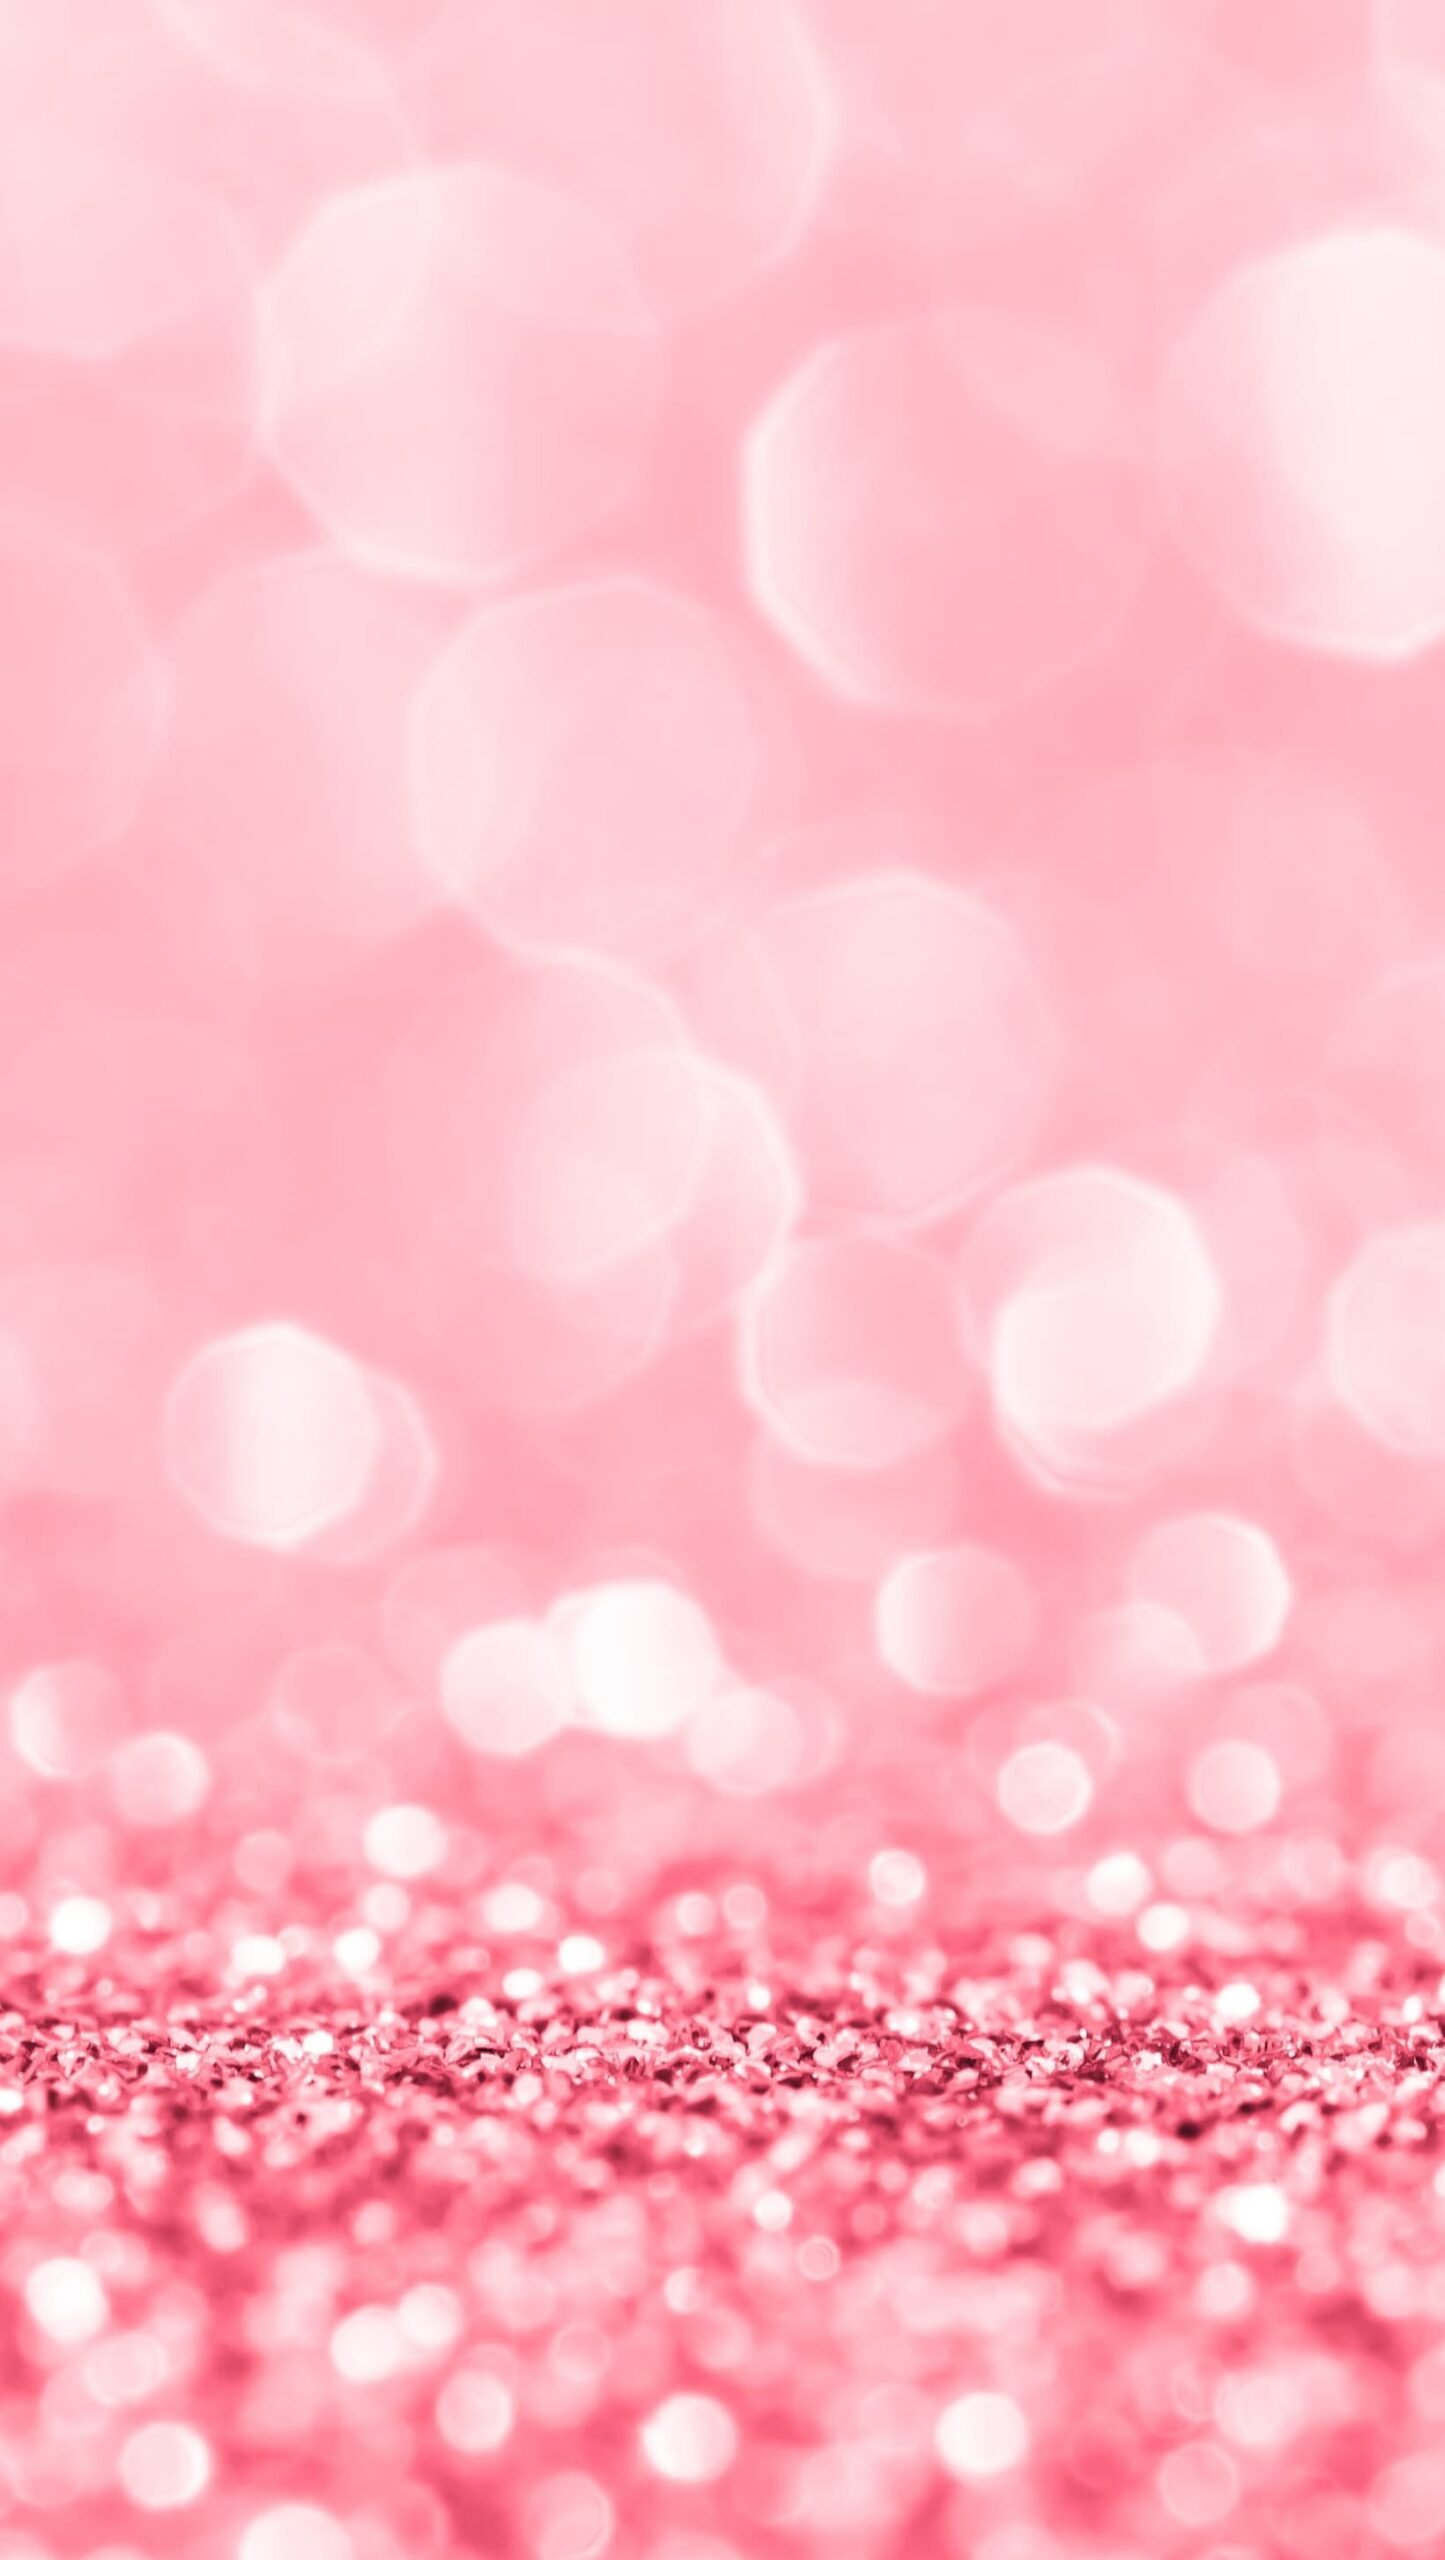 HD wallpaper valentines cards white and pink glitters digital wallpaper background Shine valentines day scaled